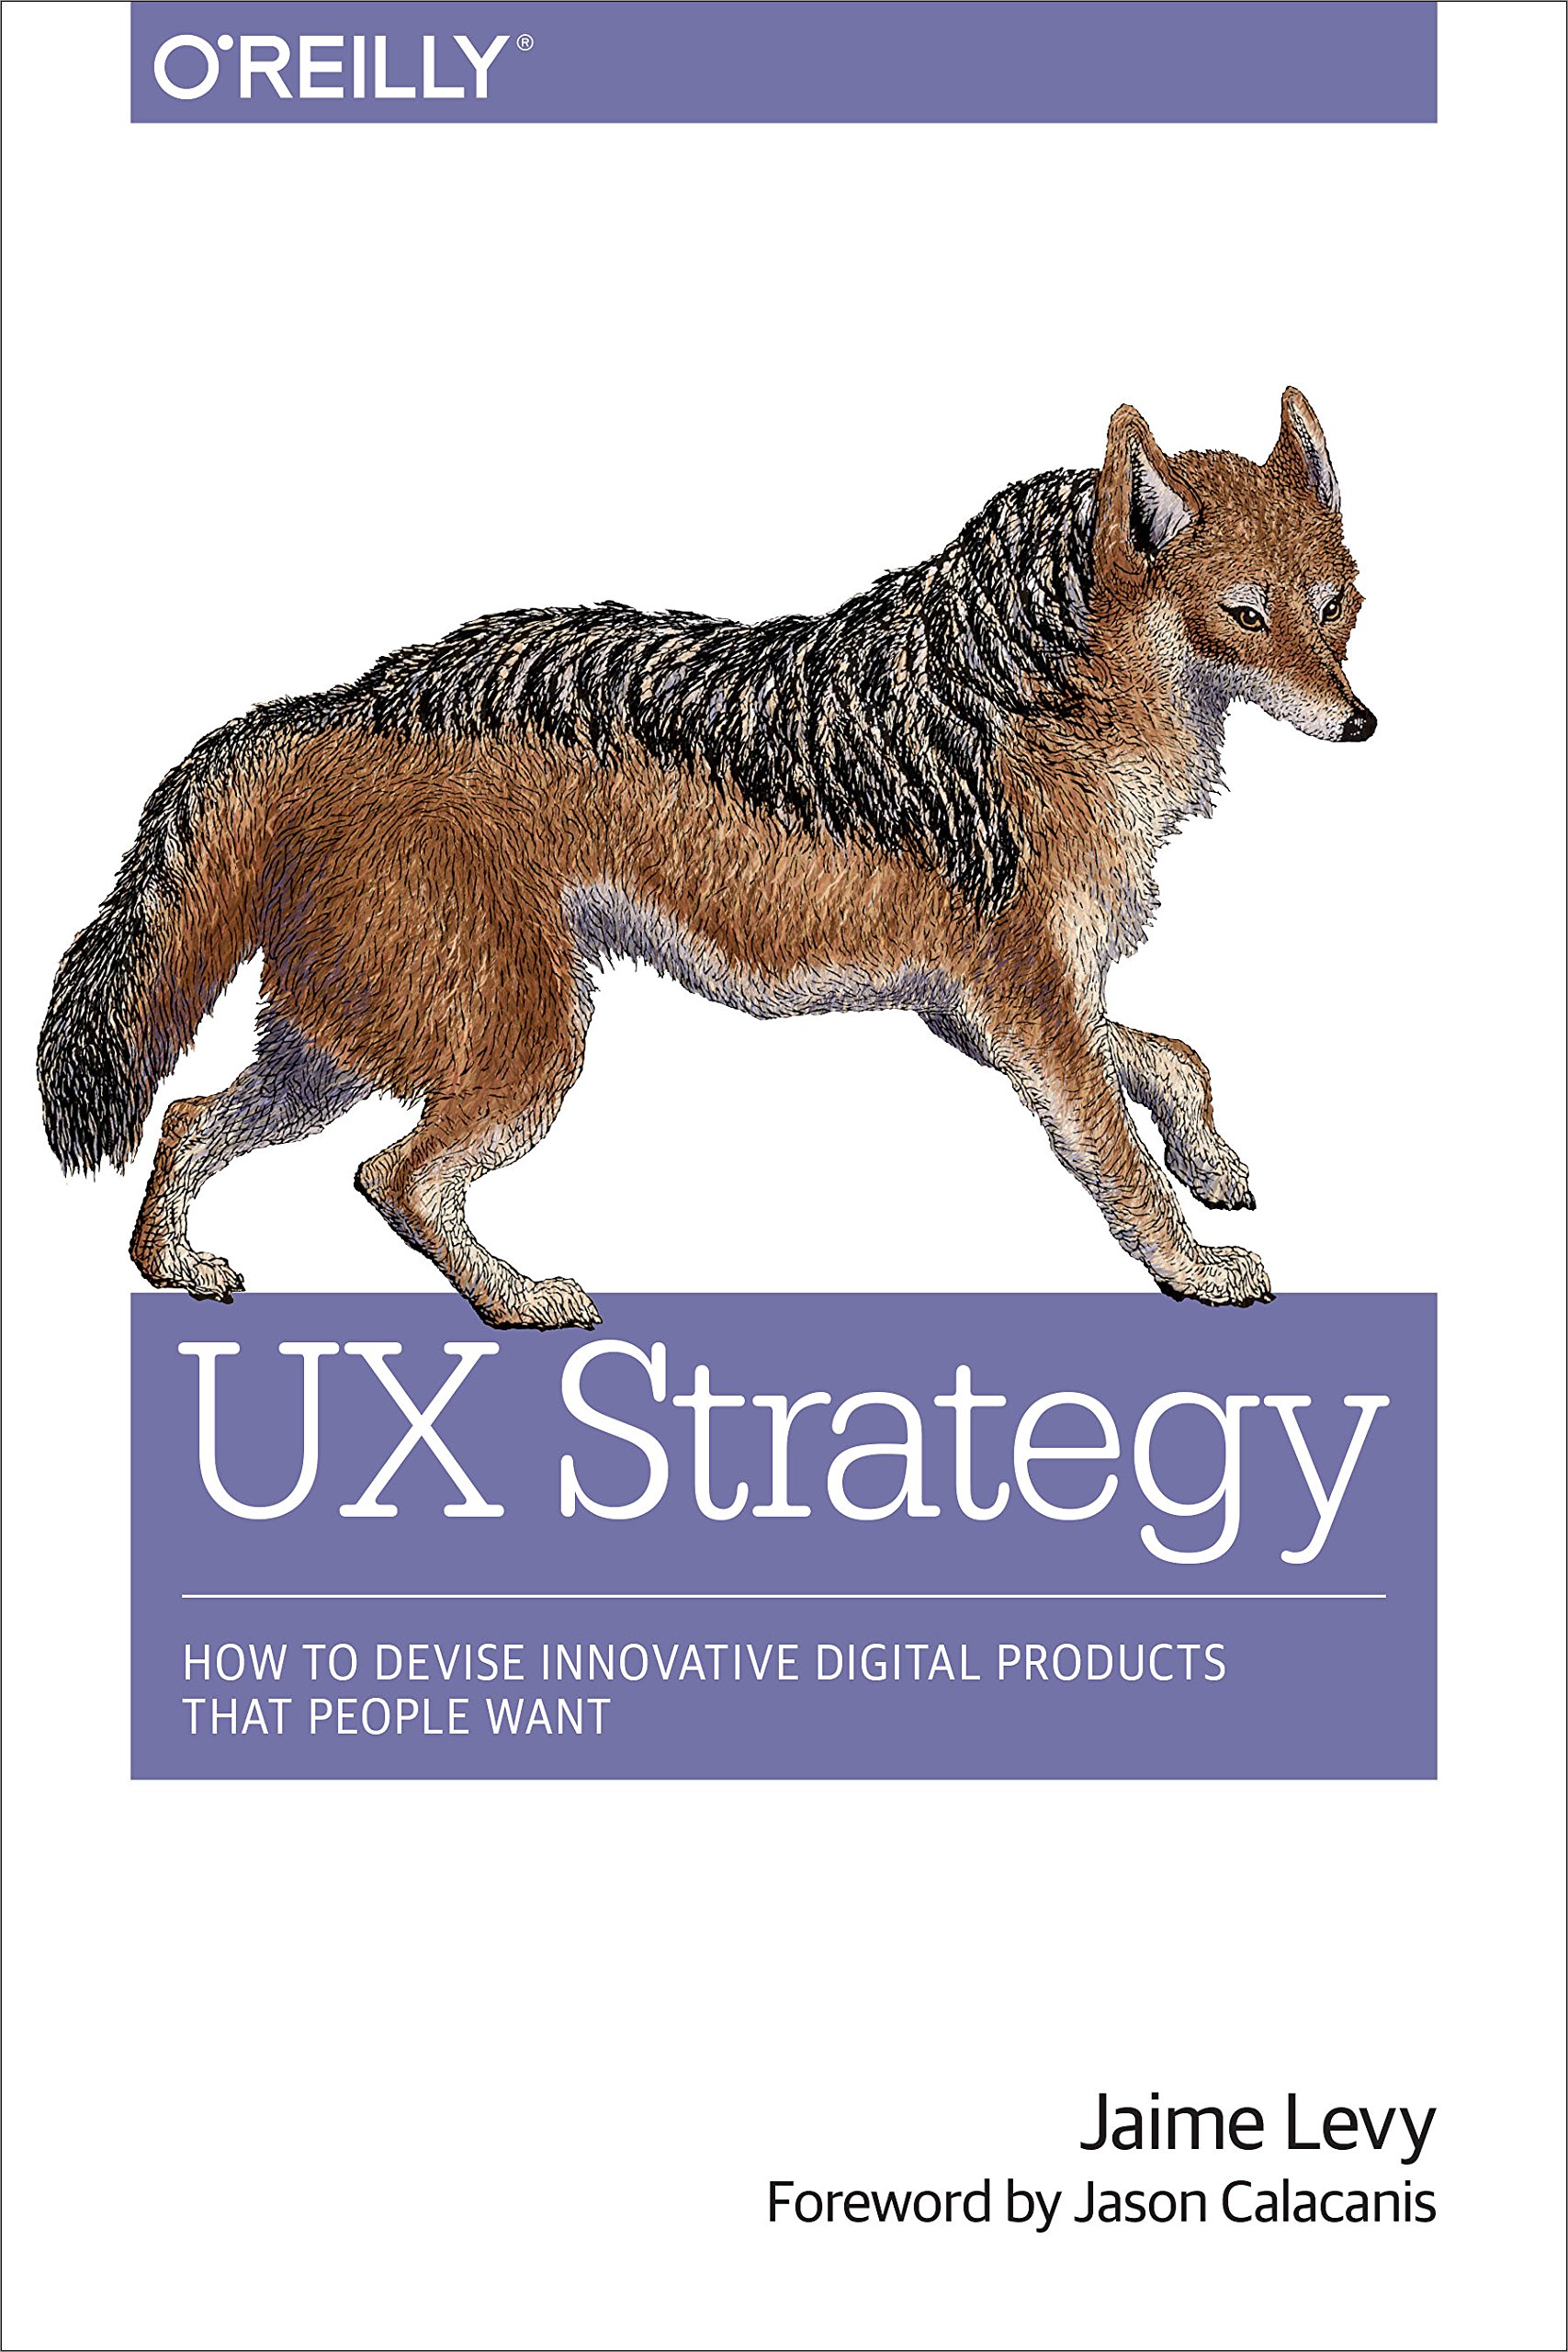 UX strategy book cover